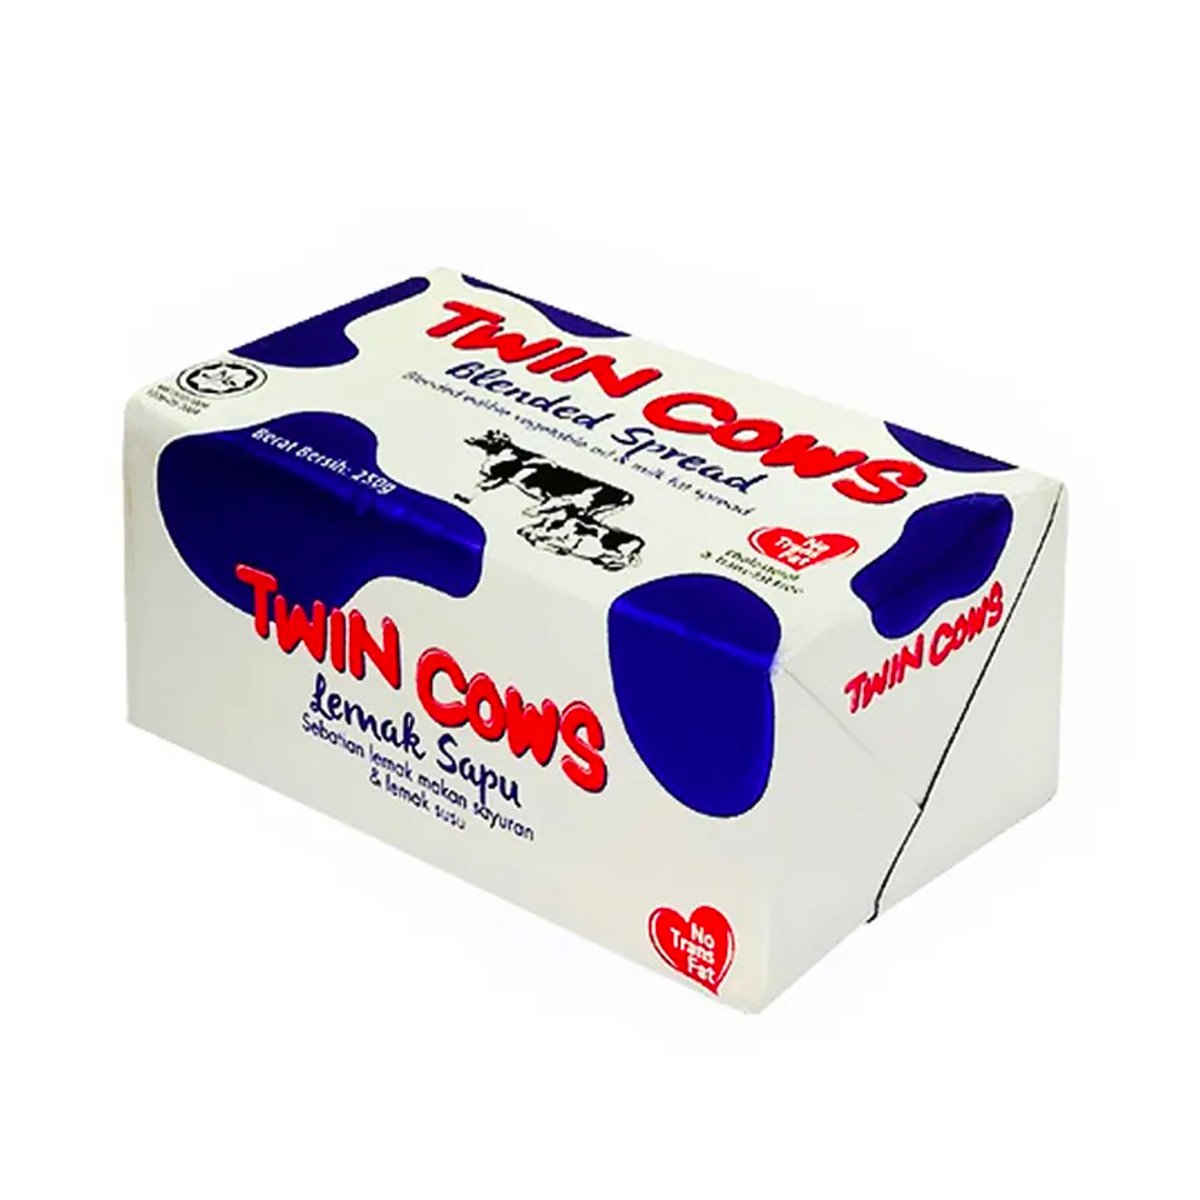 Twincows Blended Spread 250g